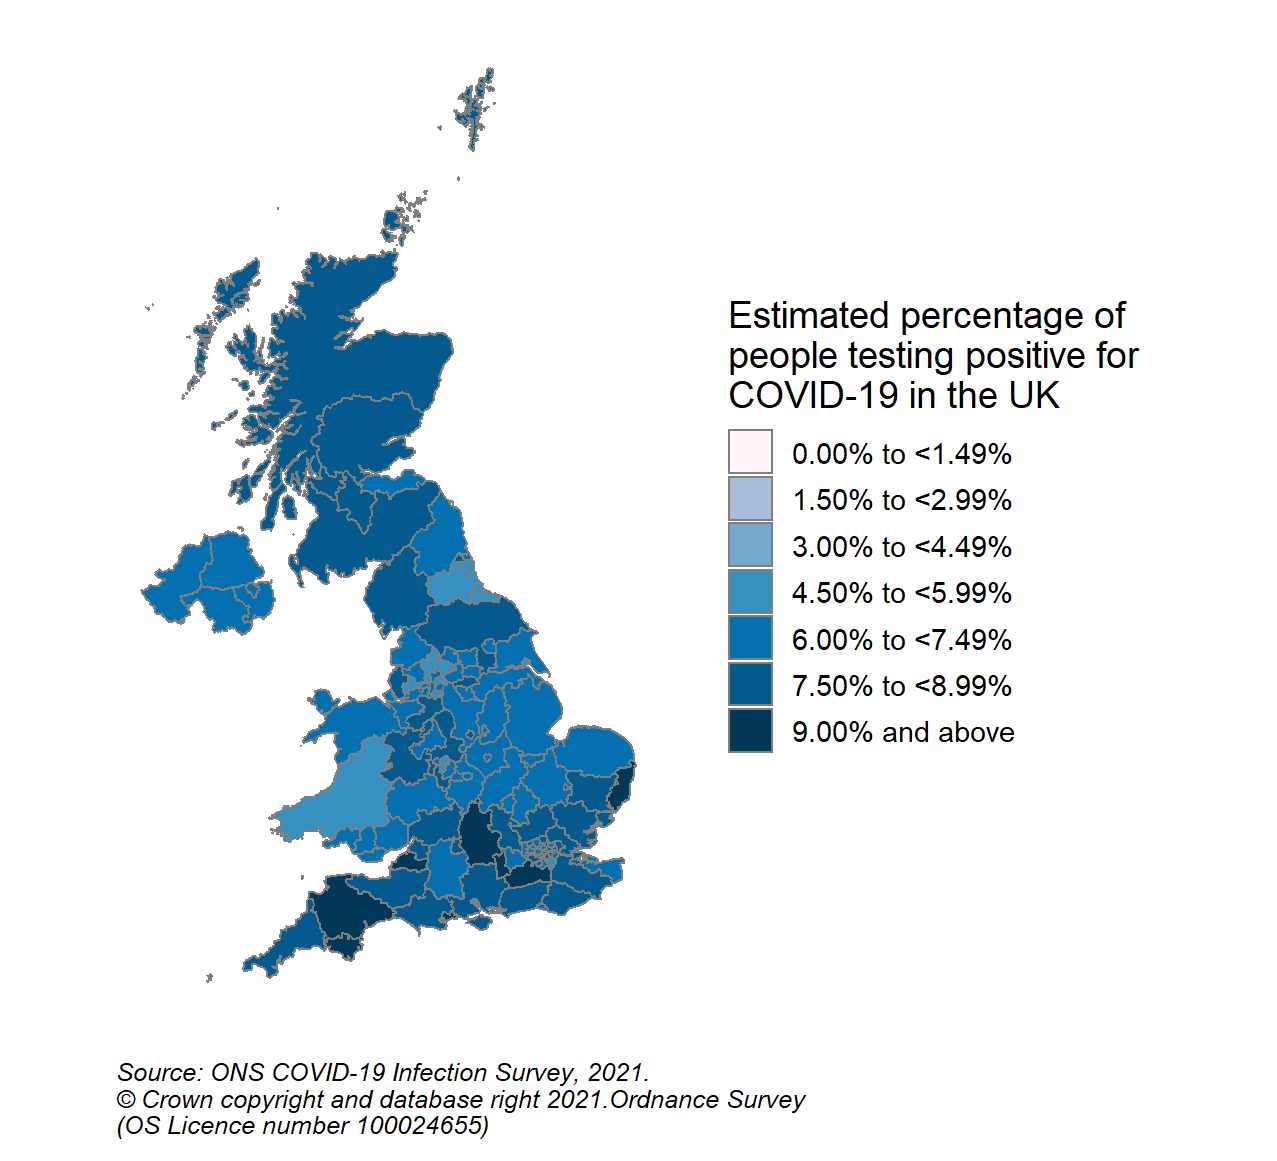 This colour coded map of the UK shows the modelled estimates of the percentage of the private residential population testing positive for COVID-19, by COVID-19 Infection Survey sub-regions. In Scotland, these sub-regions are comprised of Health Boards. The regions are: 123 - NHS Grampian, NHS Highland, NHS Orkney, NHS Shetland and NHS Western Isles, 124 - NHS Fife, NHS Forth Valley and NHS Tayside, 125 - NHS Greater Glasgow & Clyde, 126 - NHS Lothian, 127 - NHS Lanarkshire, 128 - NHS Ayrshire & Arran, NHS Borders and NHS Dumfries & Galloway.  The sub-region with the highest modelled estimate for the percentage of people testing positive was CIS Region 125 (NHS Greater Glasgow & Clyde) at 8.85% (95% credible interval: 7.66% to 10.17%).  The sub-region with the lowest modelled estimate was CIS Region 126 (NHS Lothian), at 7.09% (95% credible interval: 6.07% to 8.29%).